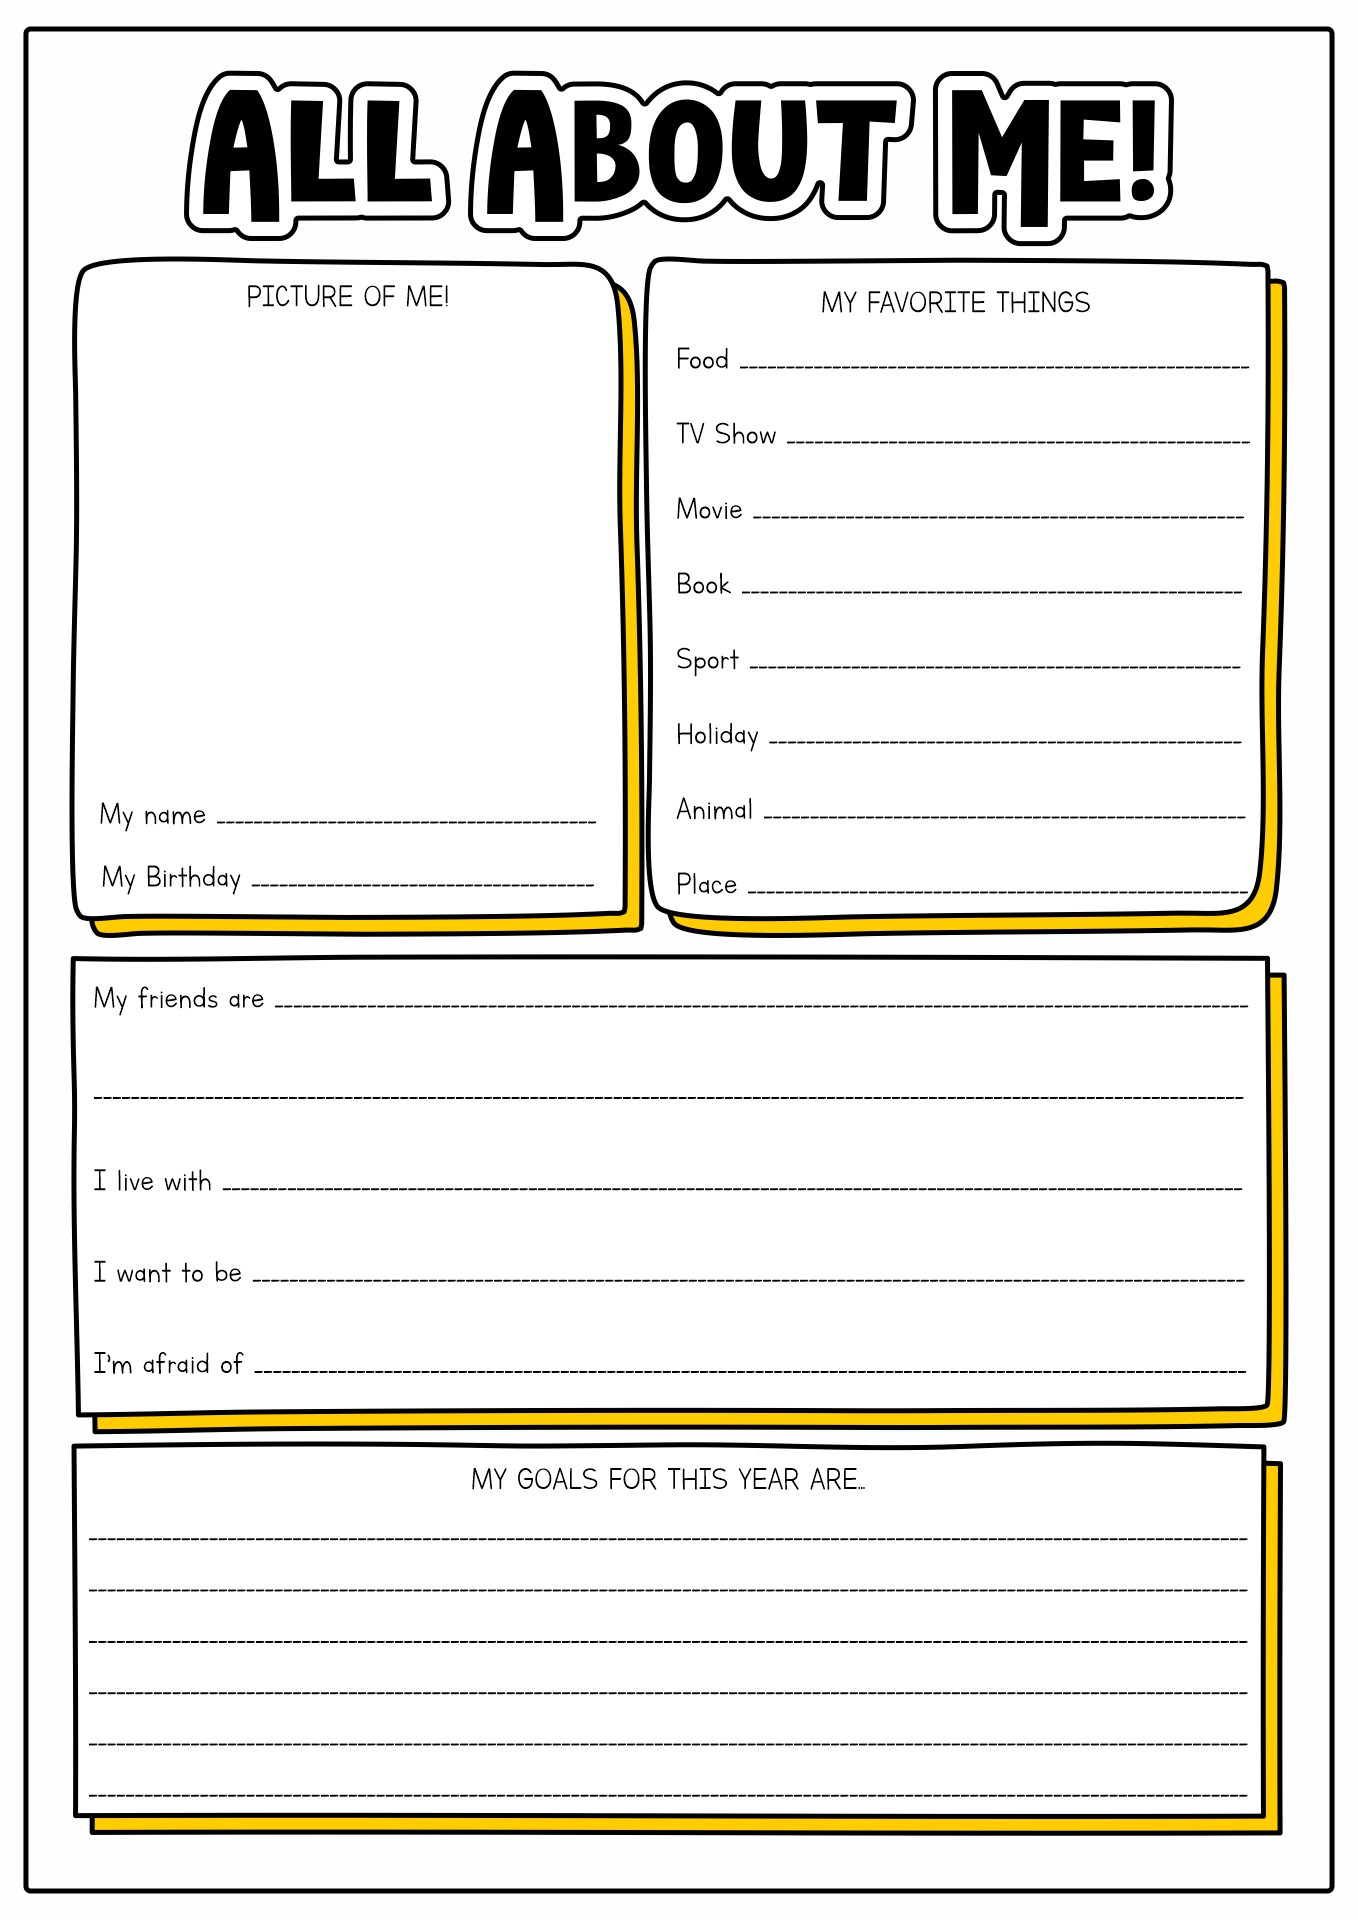 all-about-me-printable-template-for-use-book-template-all-about-me